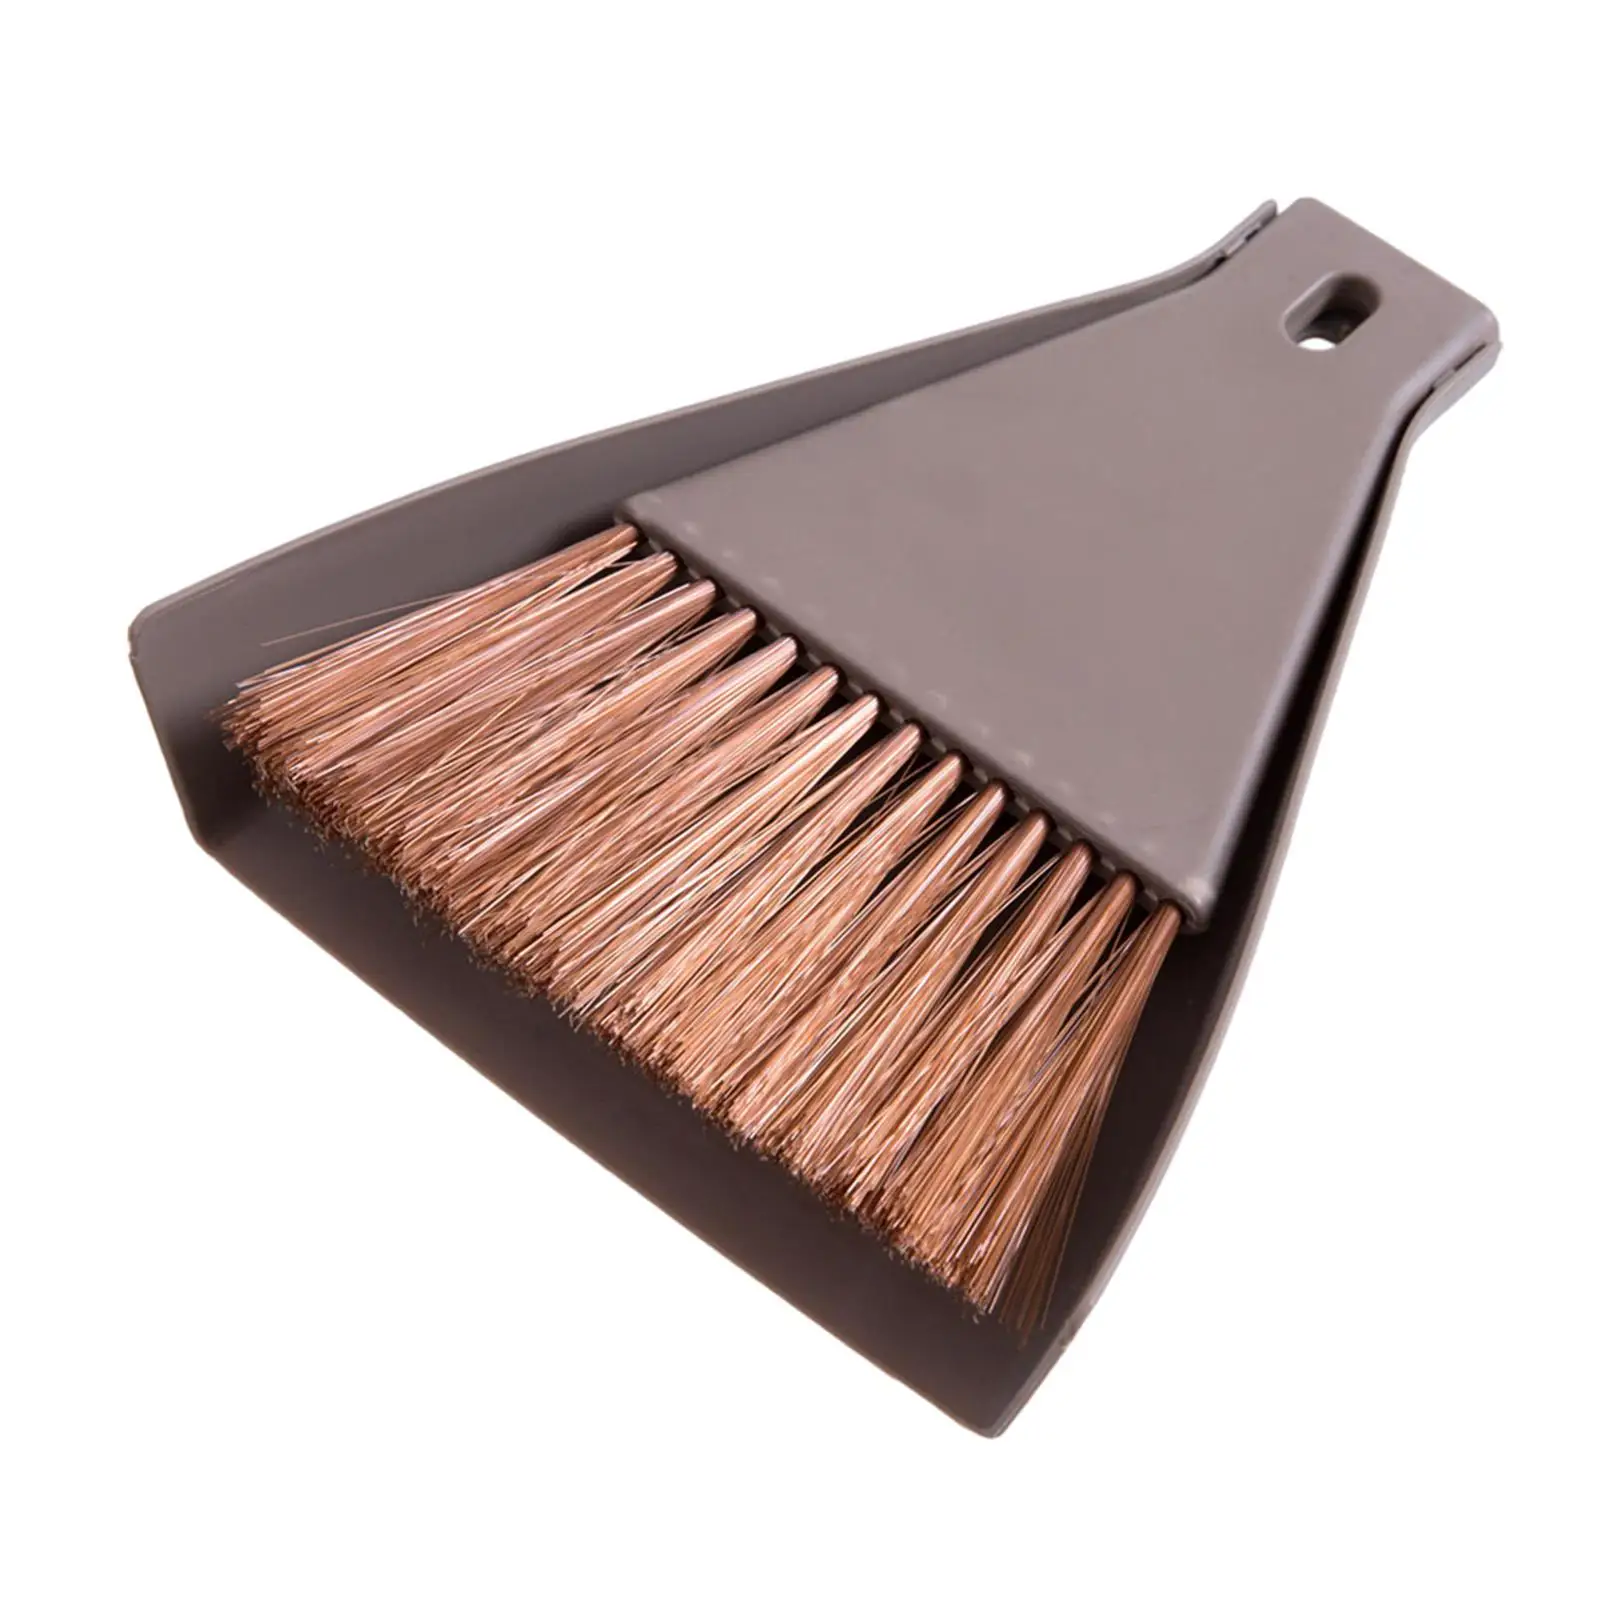 Small Broom and Dustpan Set Durable Hand Brush Lightweight Practical Cleaning Brush Sweep Broom for Car Home Desk Computer Table